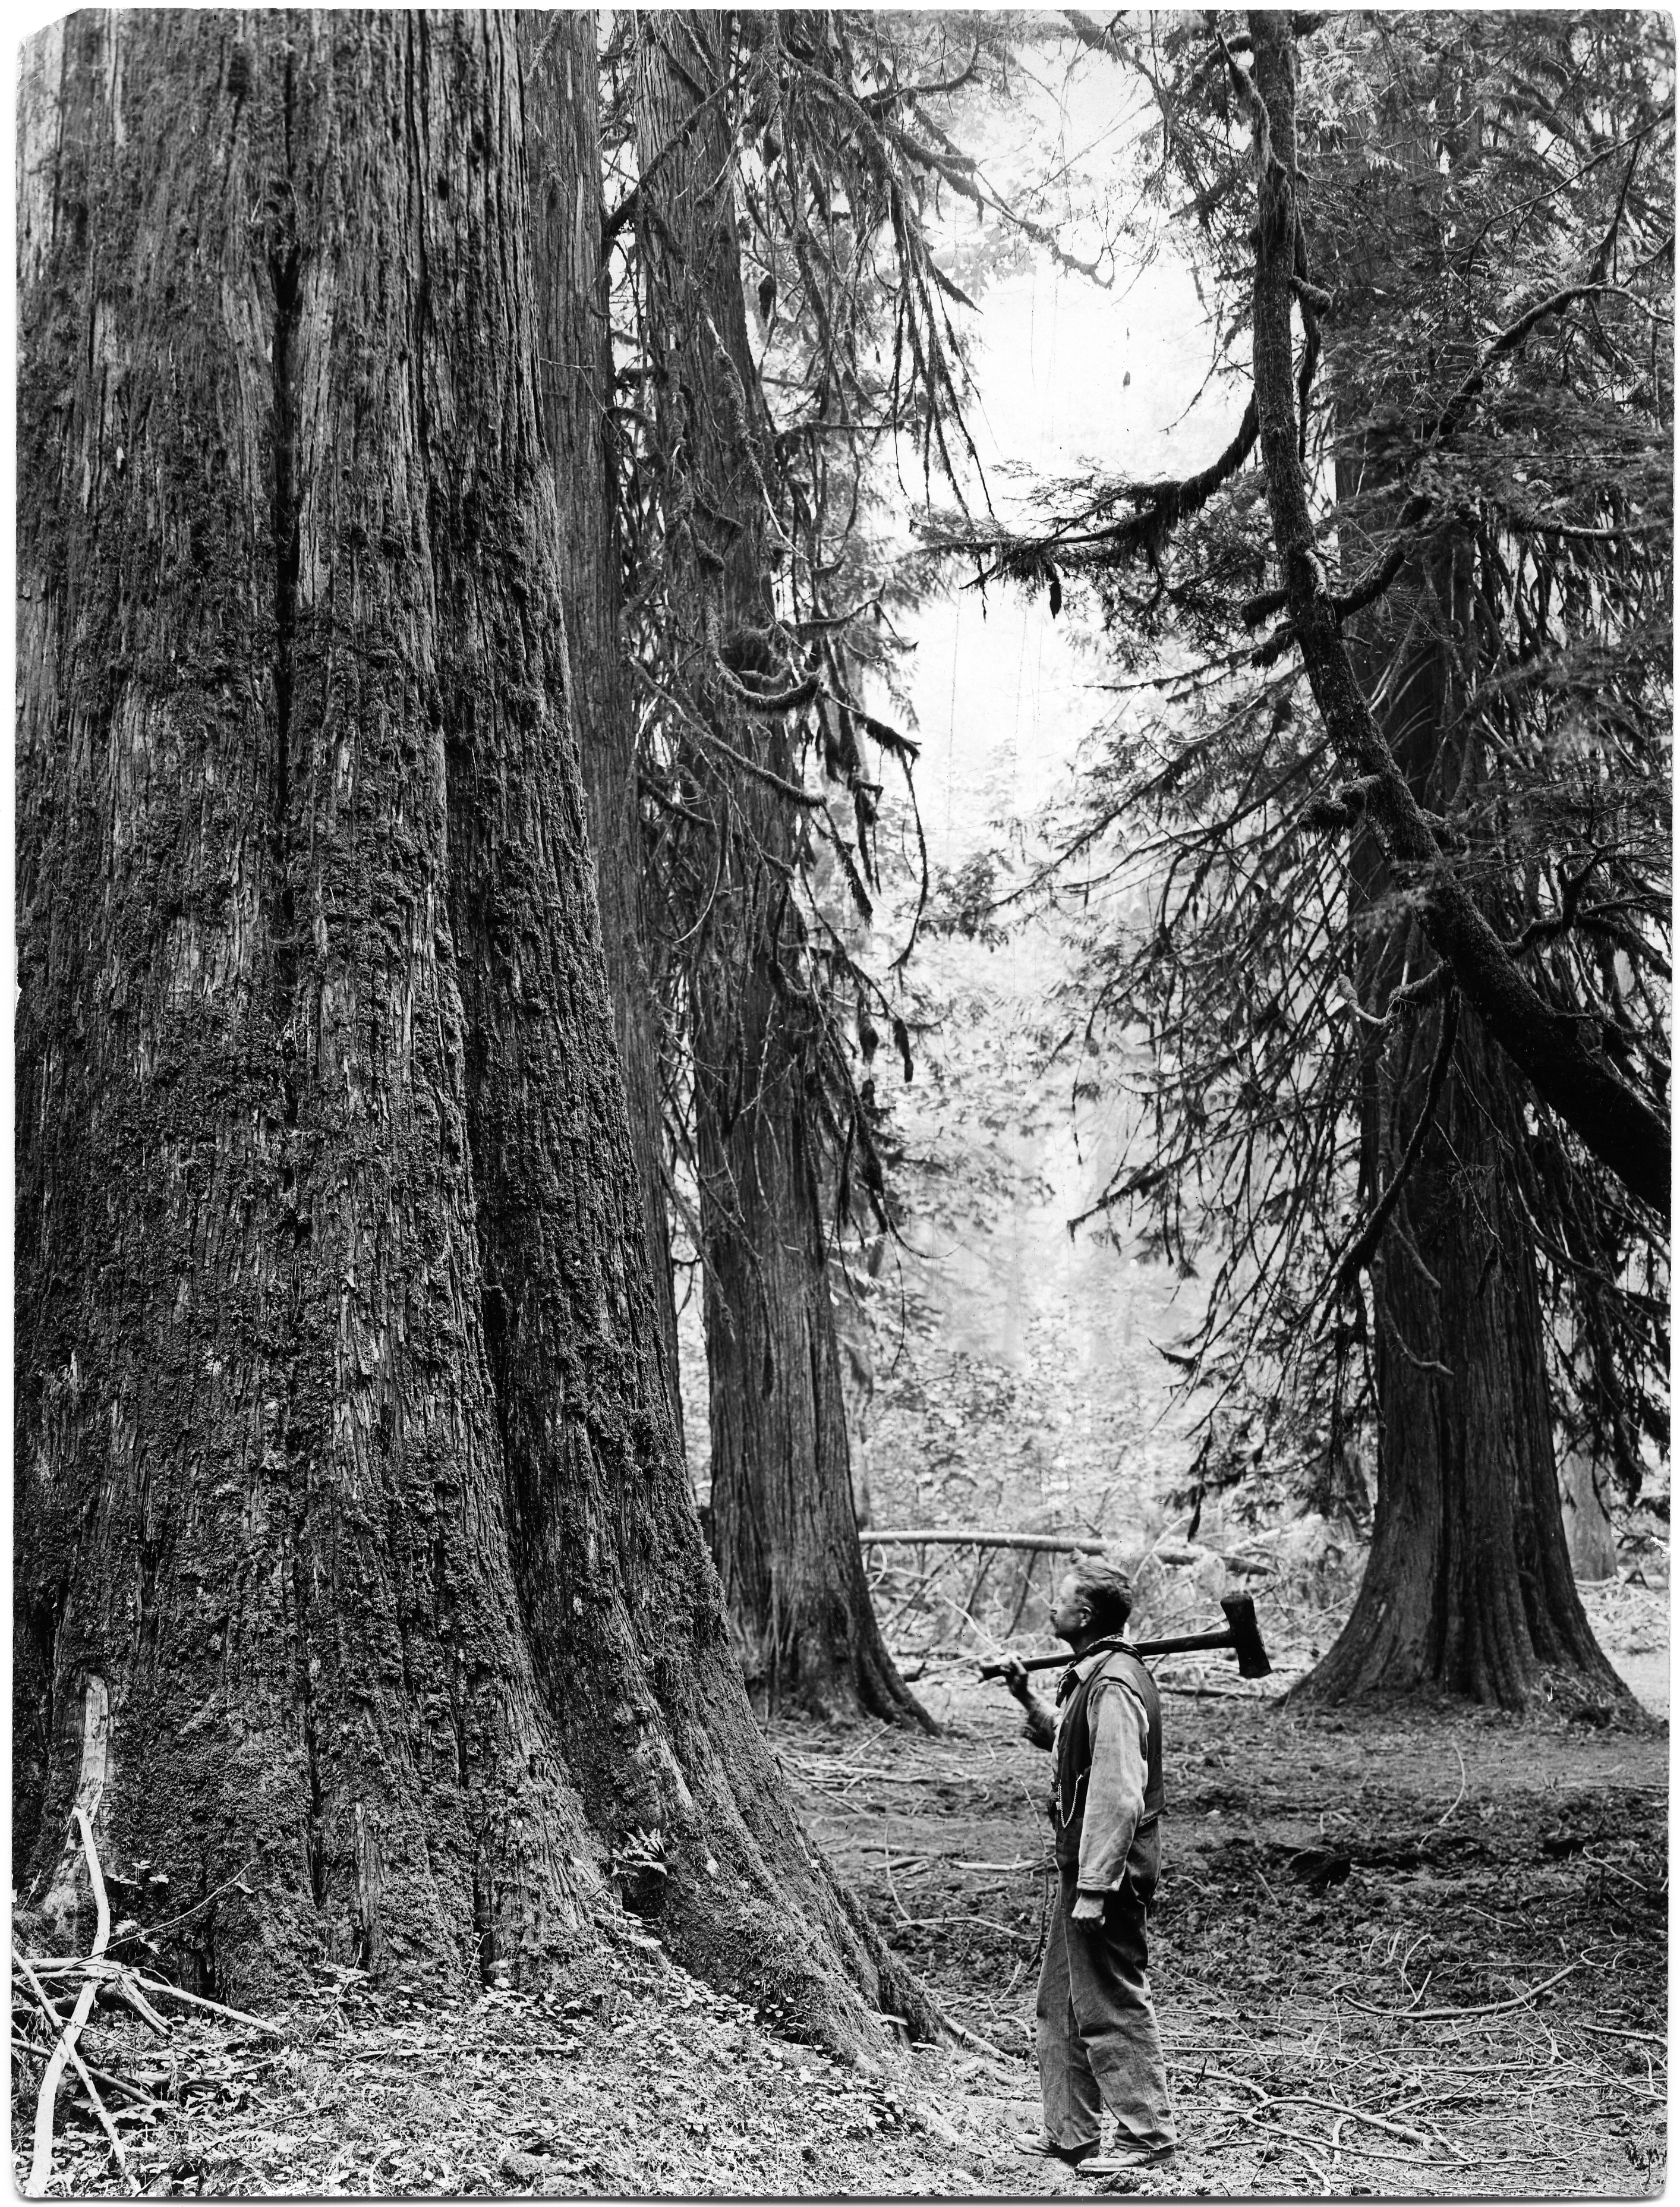 Black and white image of a man with an axe standing in a forest of massive Giant Douglas Fir trees.